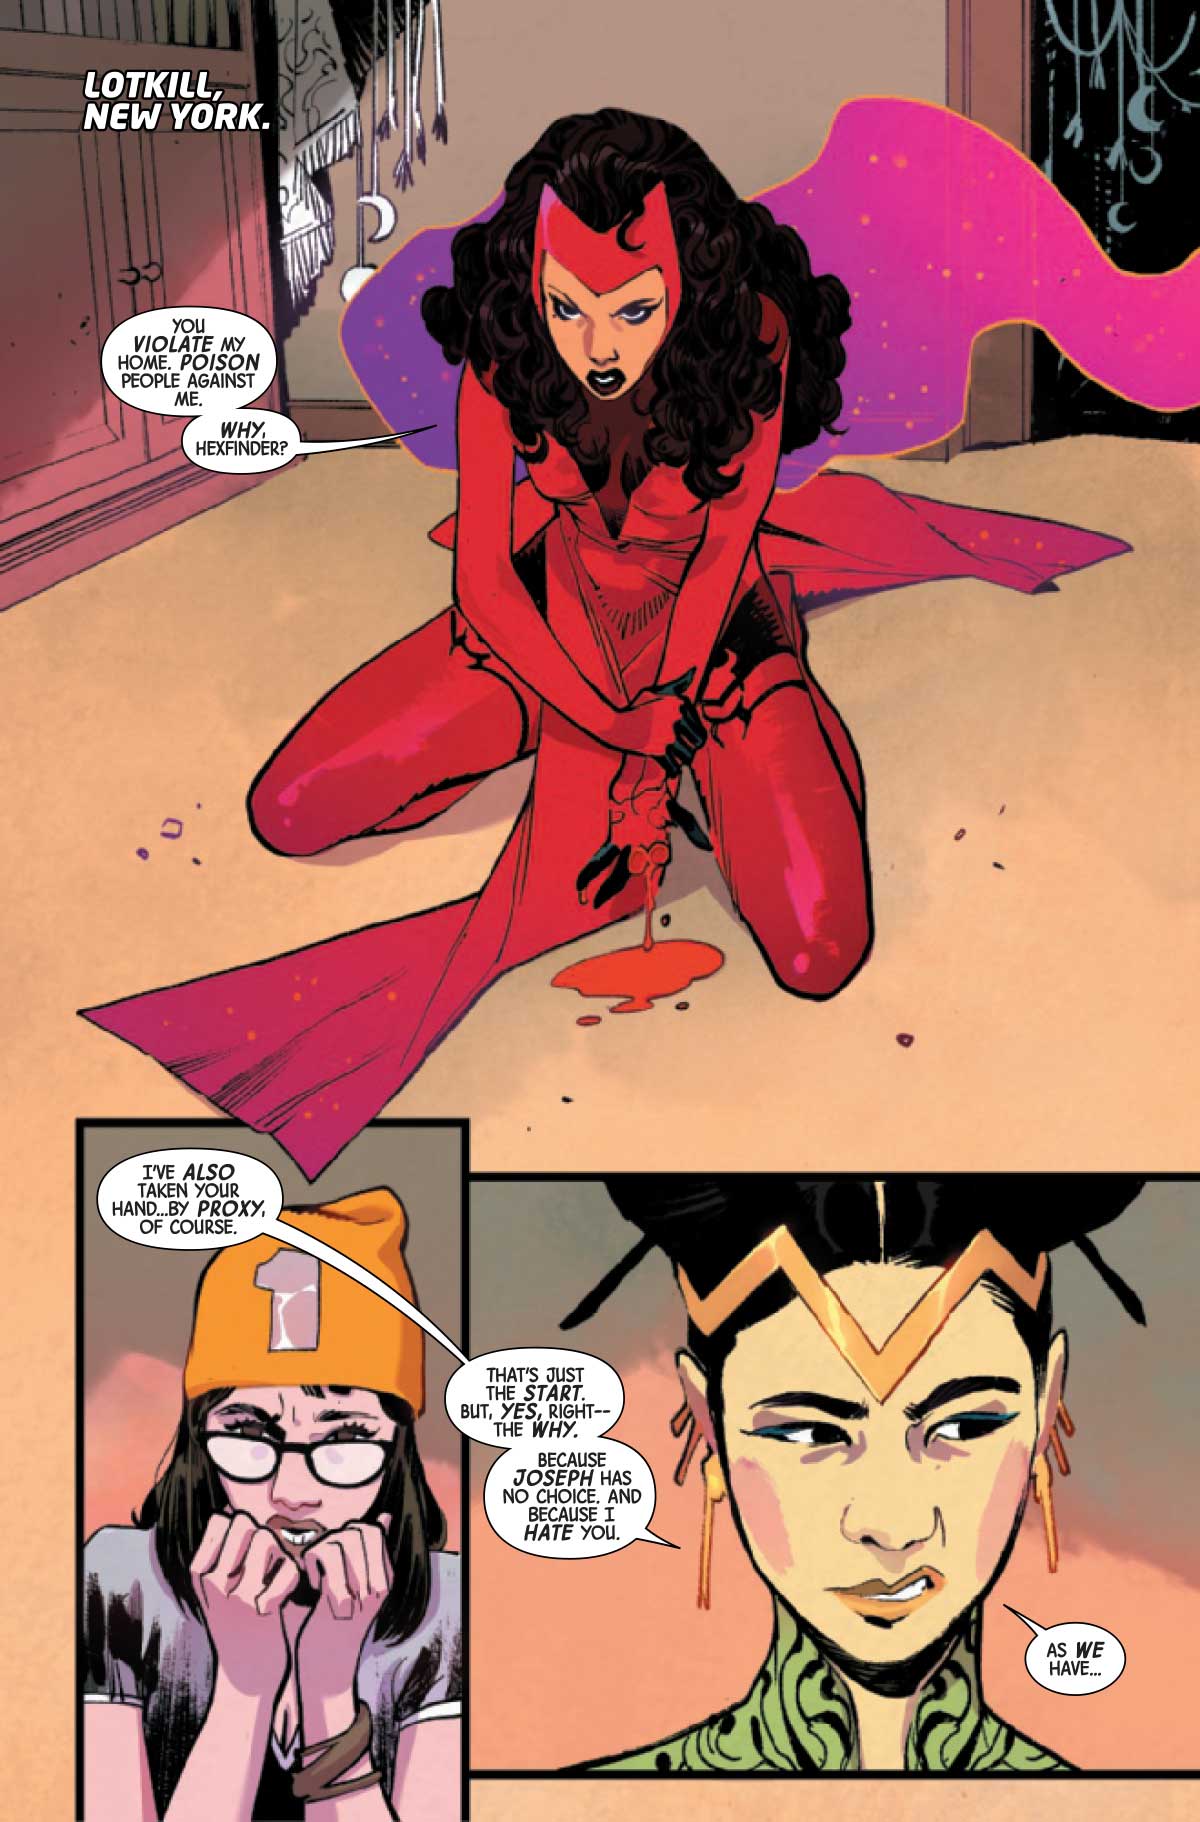 FIRST LOOK: Scarlet Witch #10 — Major Spoilers — Comic Book